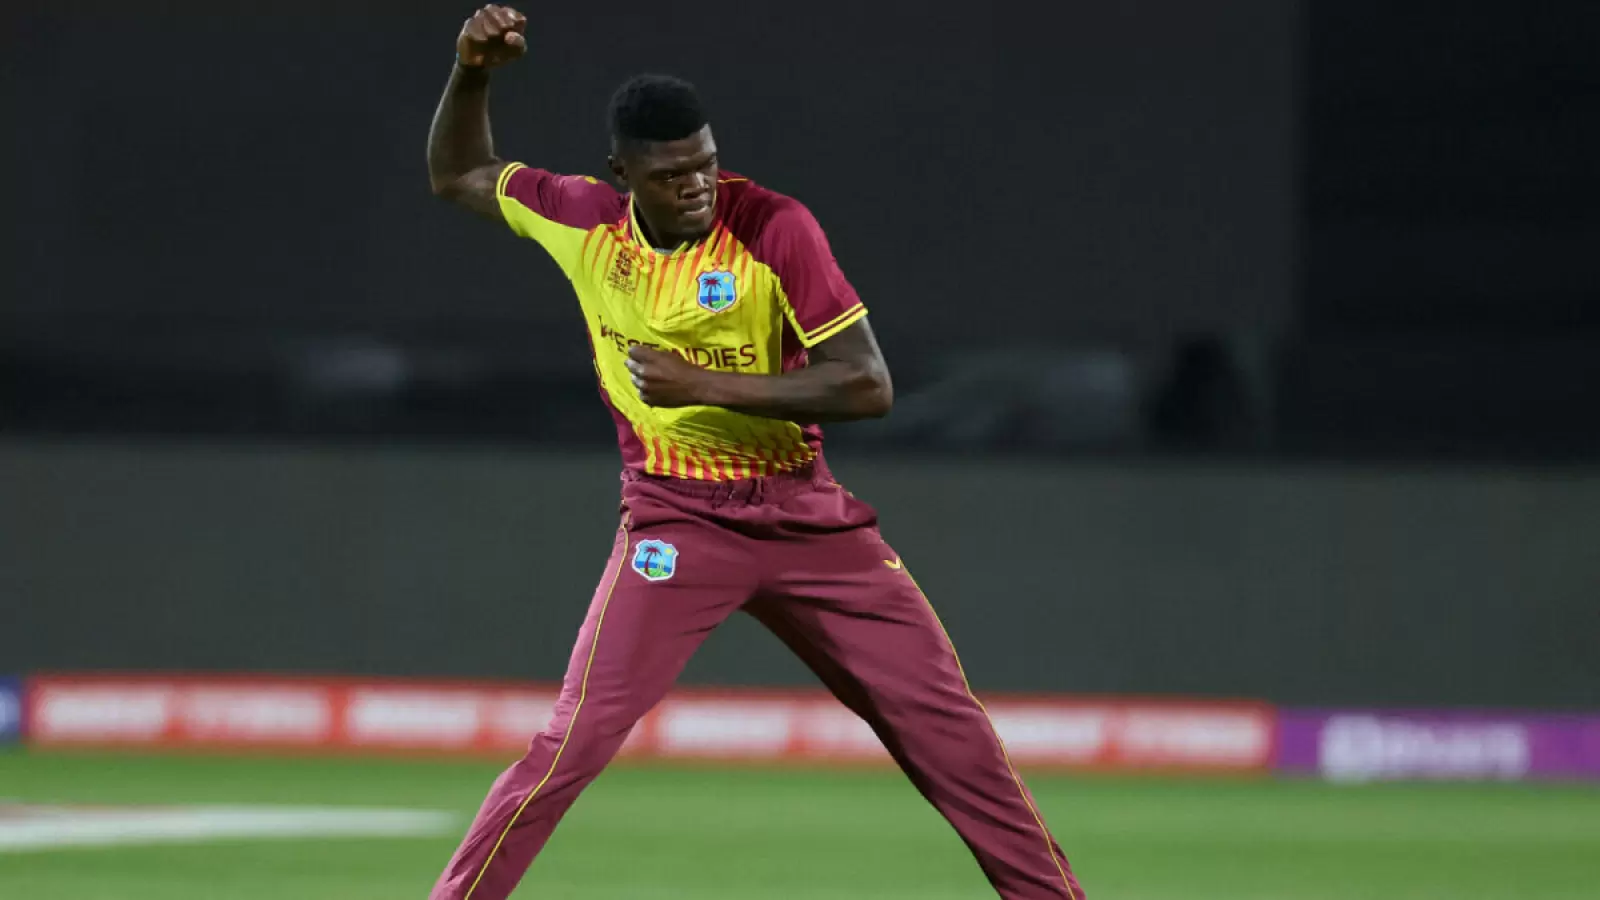 RCB will give a chance to this veteran by leaving out Alzarri Joseph, see the playing 11 of both the teams